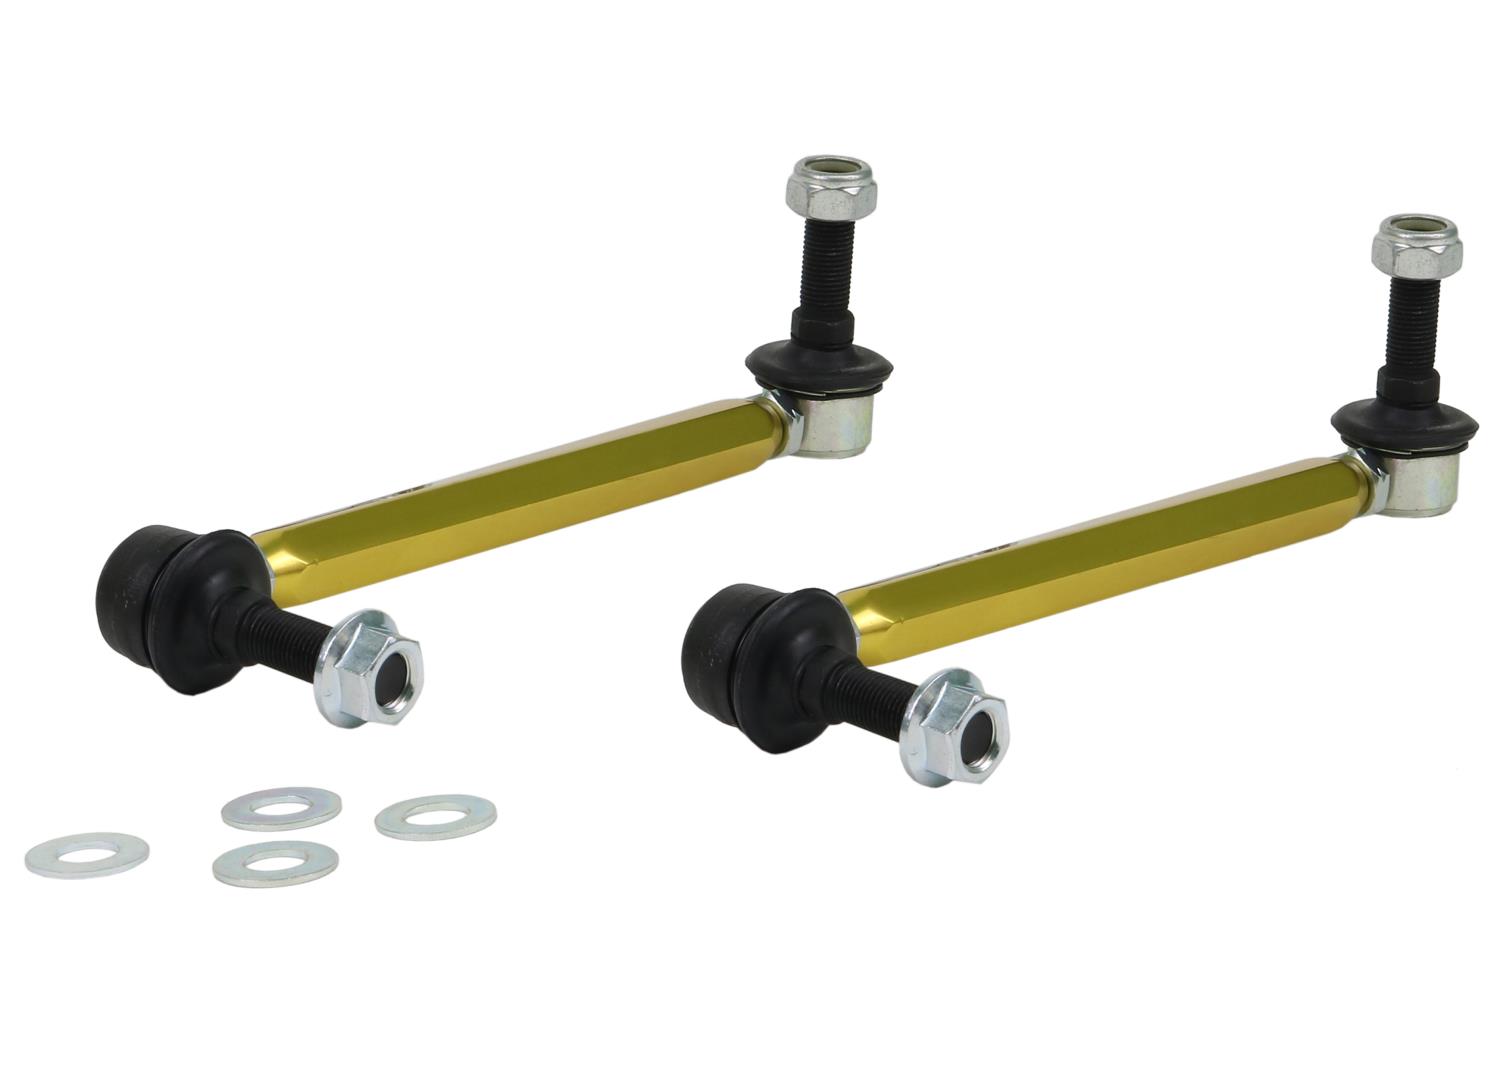 KLC180-235 Universal Sway Bar Link Assembly Heavy Duty Adjustable 12 mm Steel Ball/Ball Style